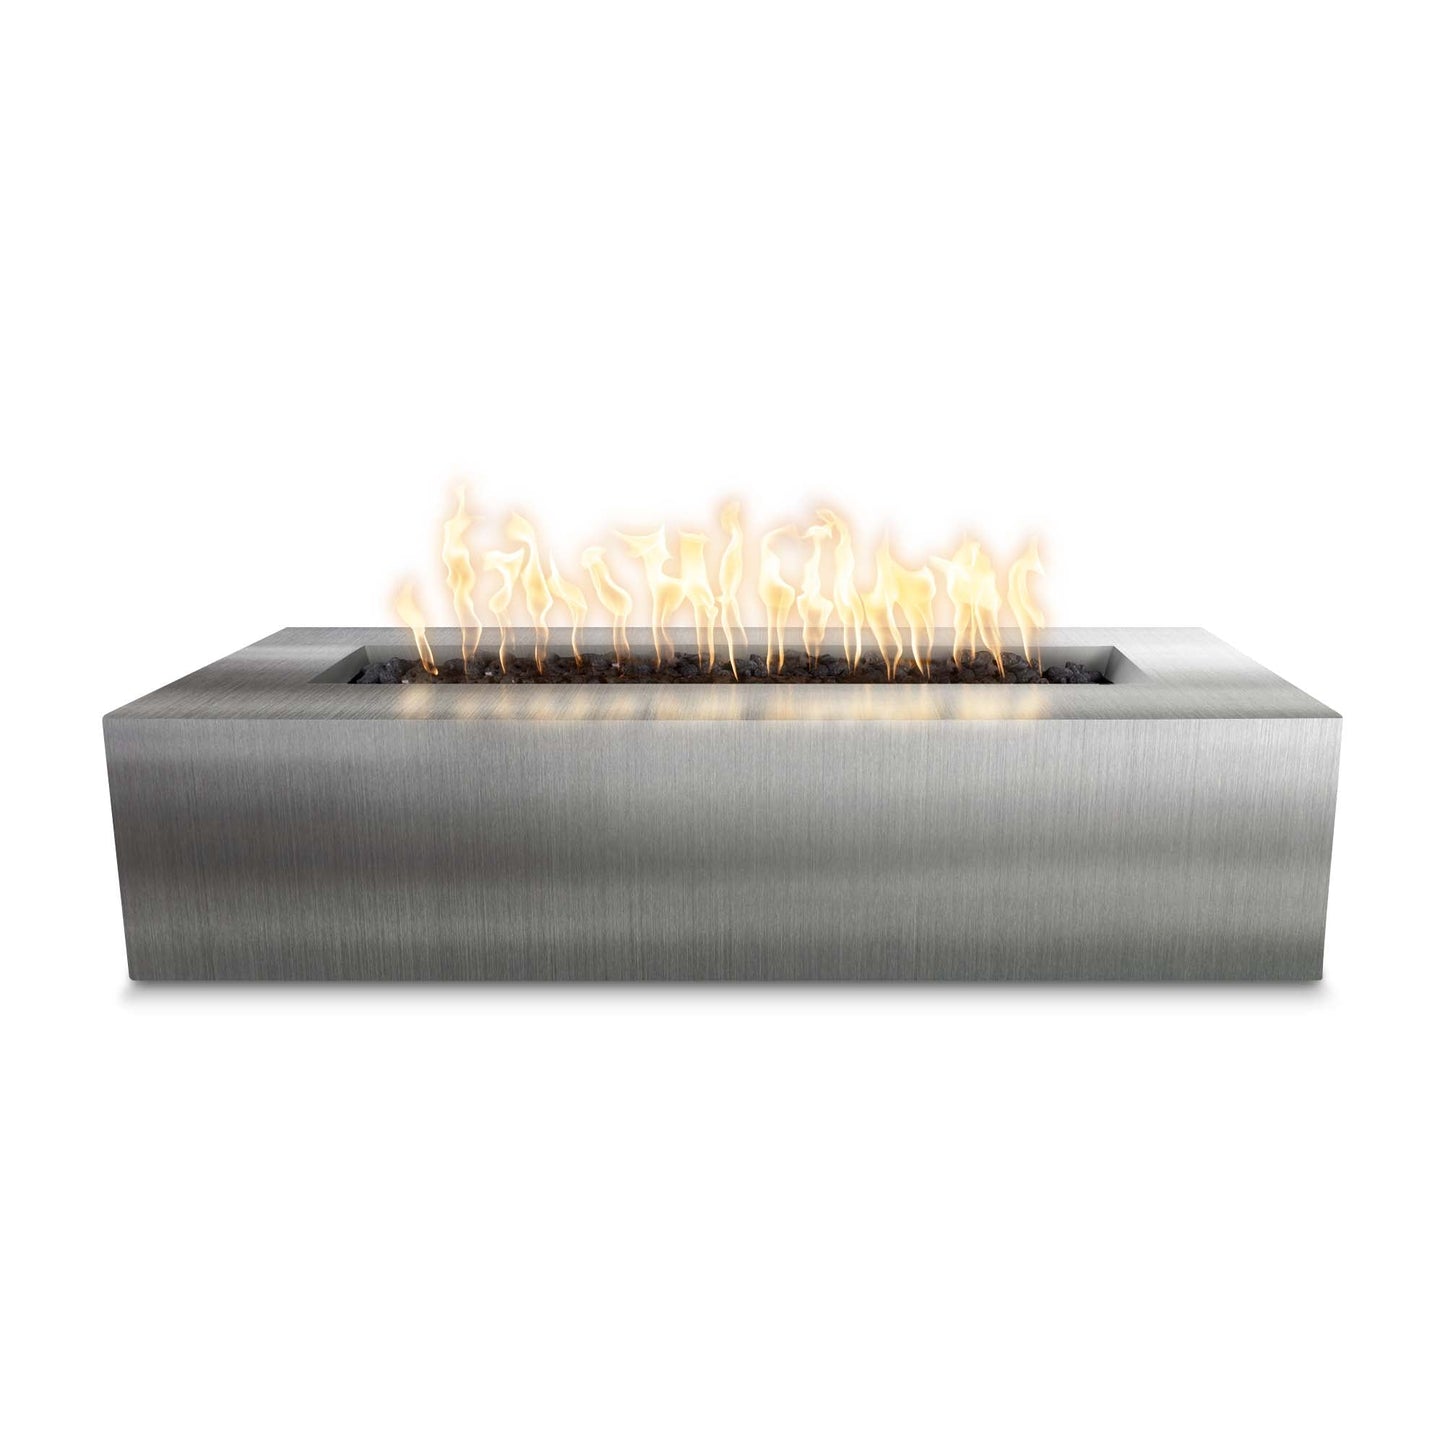 The Outdoor Plus Rectangular Regal 48" Hammered Copper Liquid Propane Fire Pit with Flame Sense with Spark Ignition